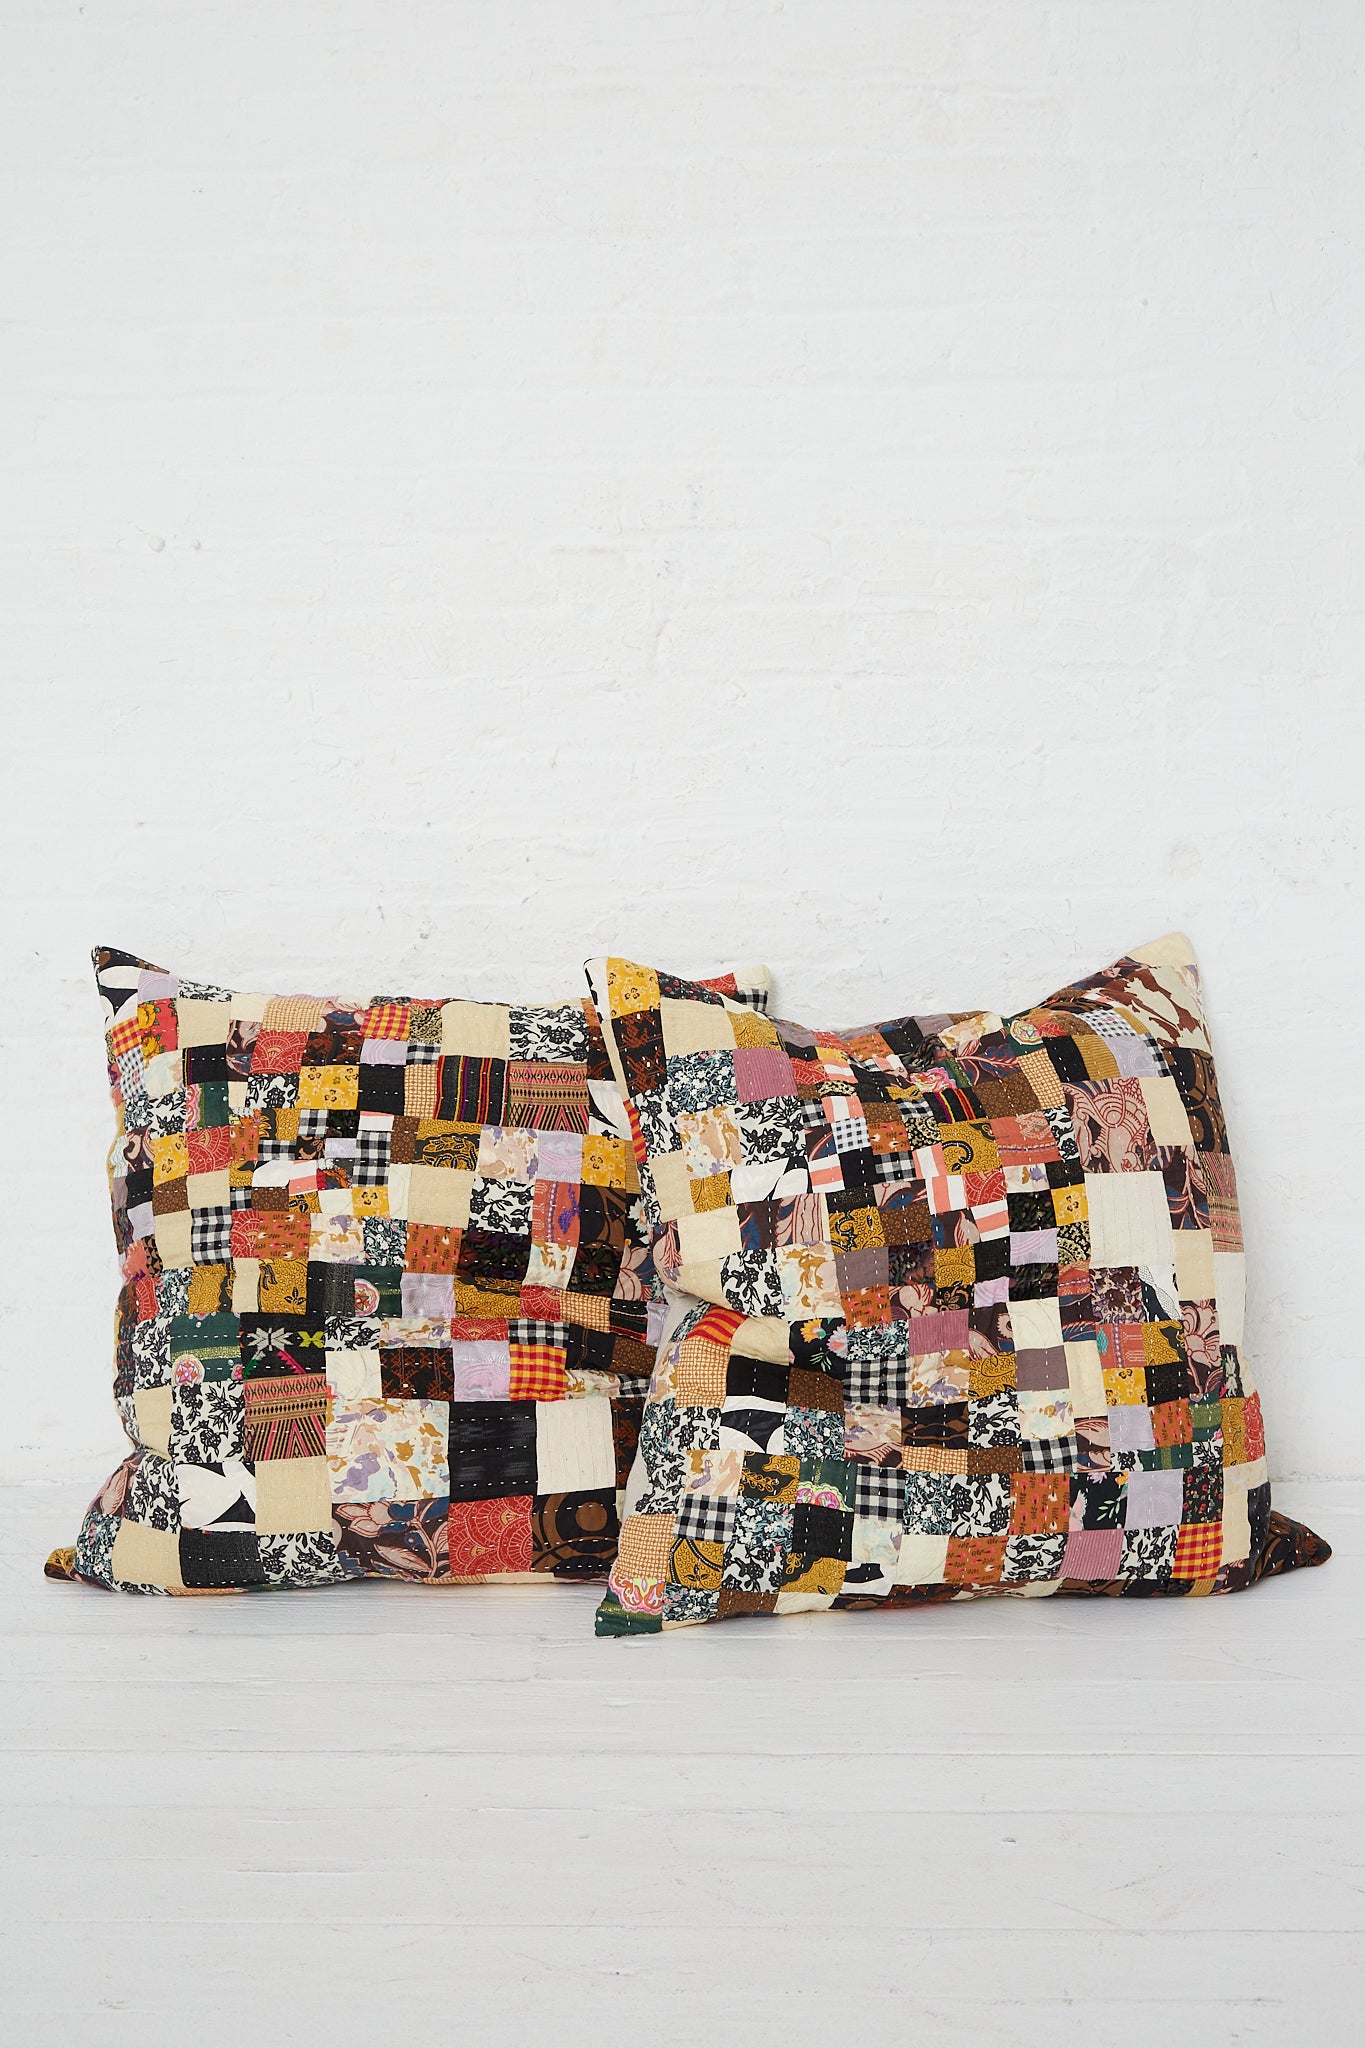 Two Counterpane antique patchwork pillows in Brown Multi I on a white background.